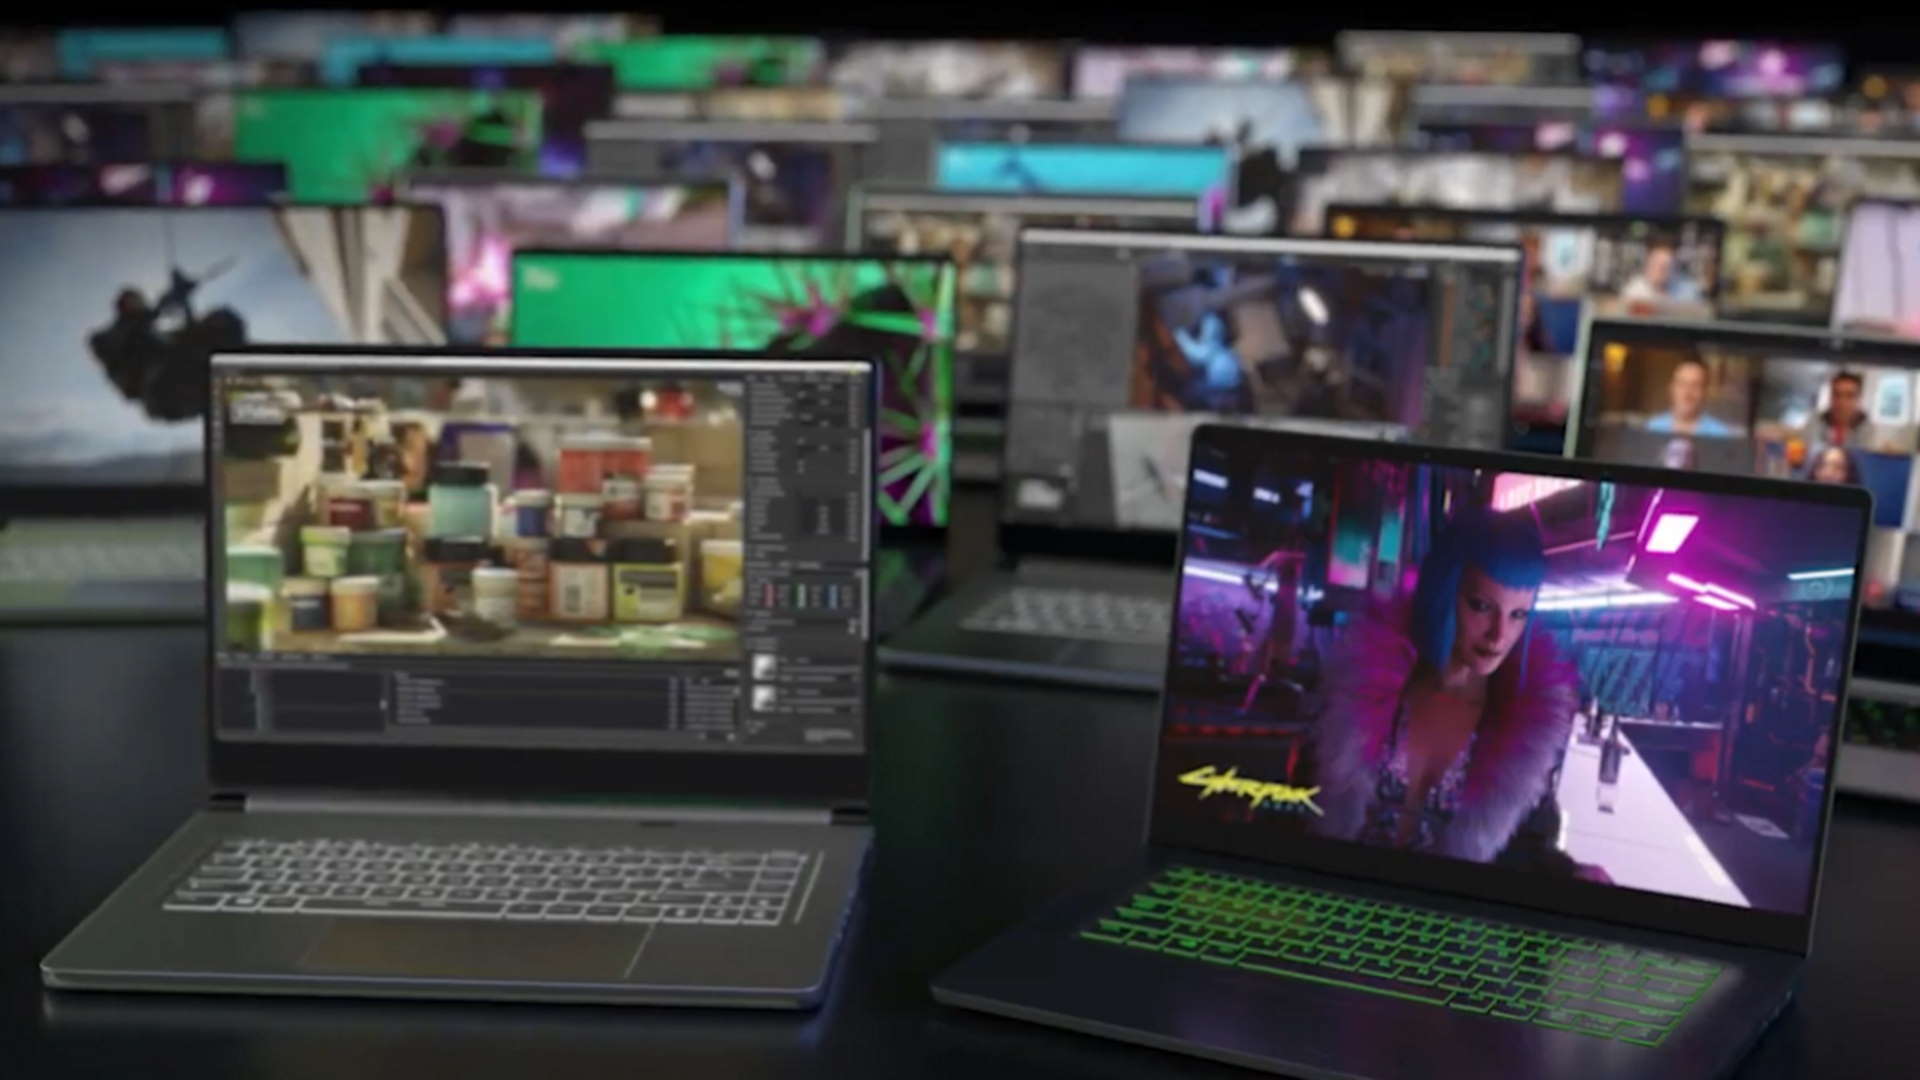  Nvidia's $999 RTX 3060 gaming laptops offer 30 percent higher performance than a PS5 